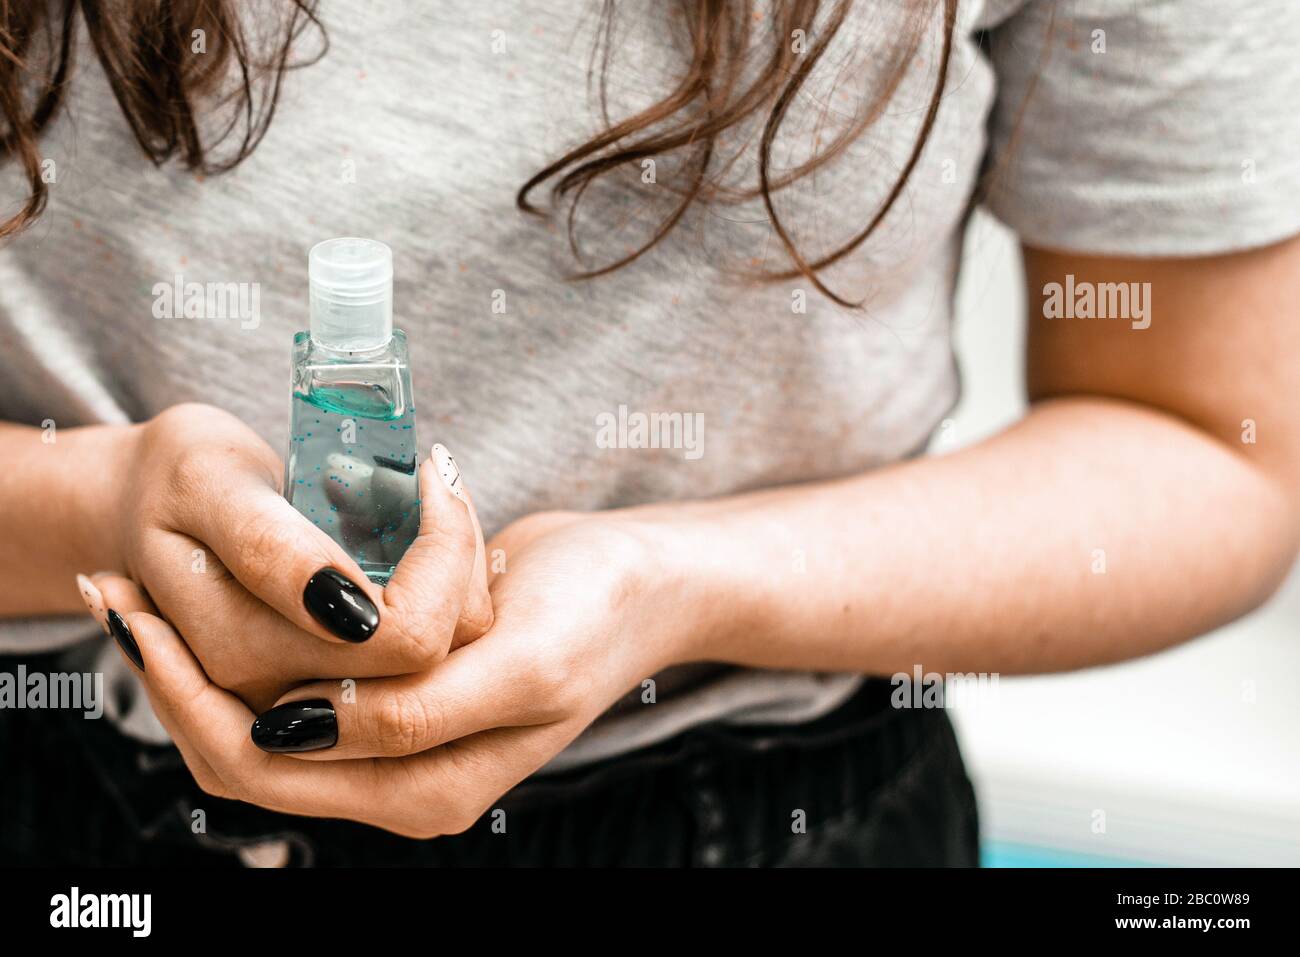 Girl holds antibacterial gel sanitizer in her hands. Prevention and precautions in the fight against coronavirus. Stock Photo